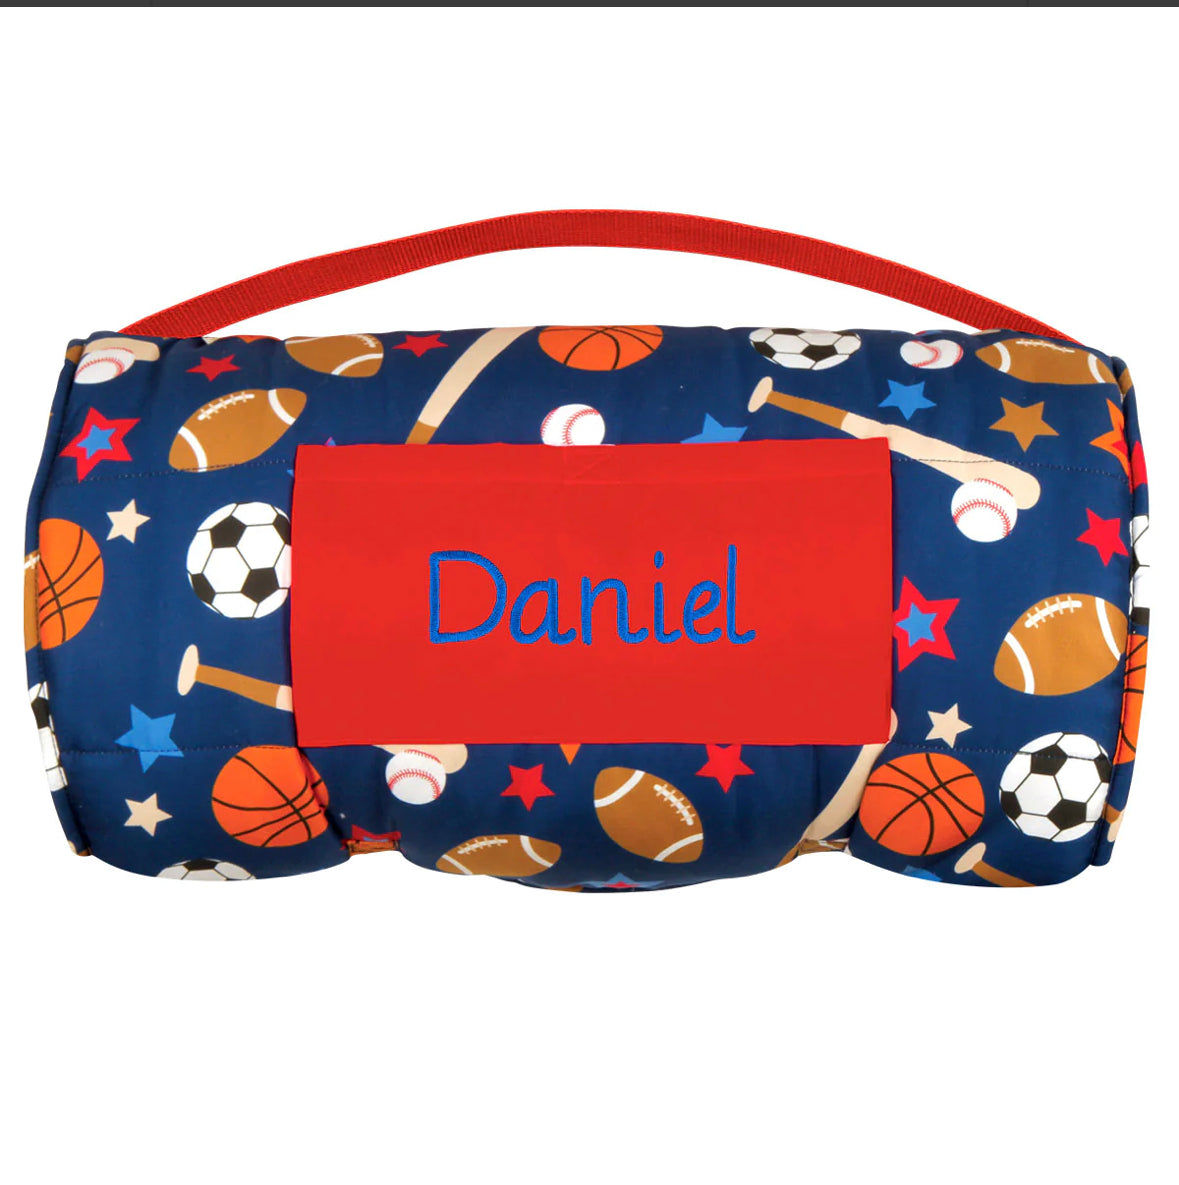 A personalized Stephen Joseph Nap Mat - Sports with sports balls and stars.